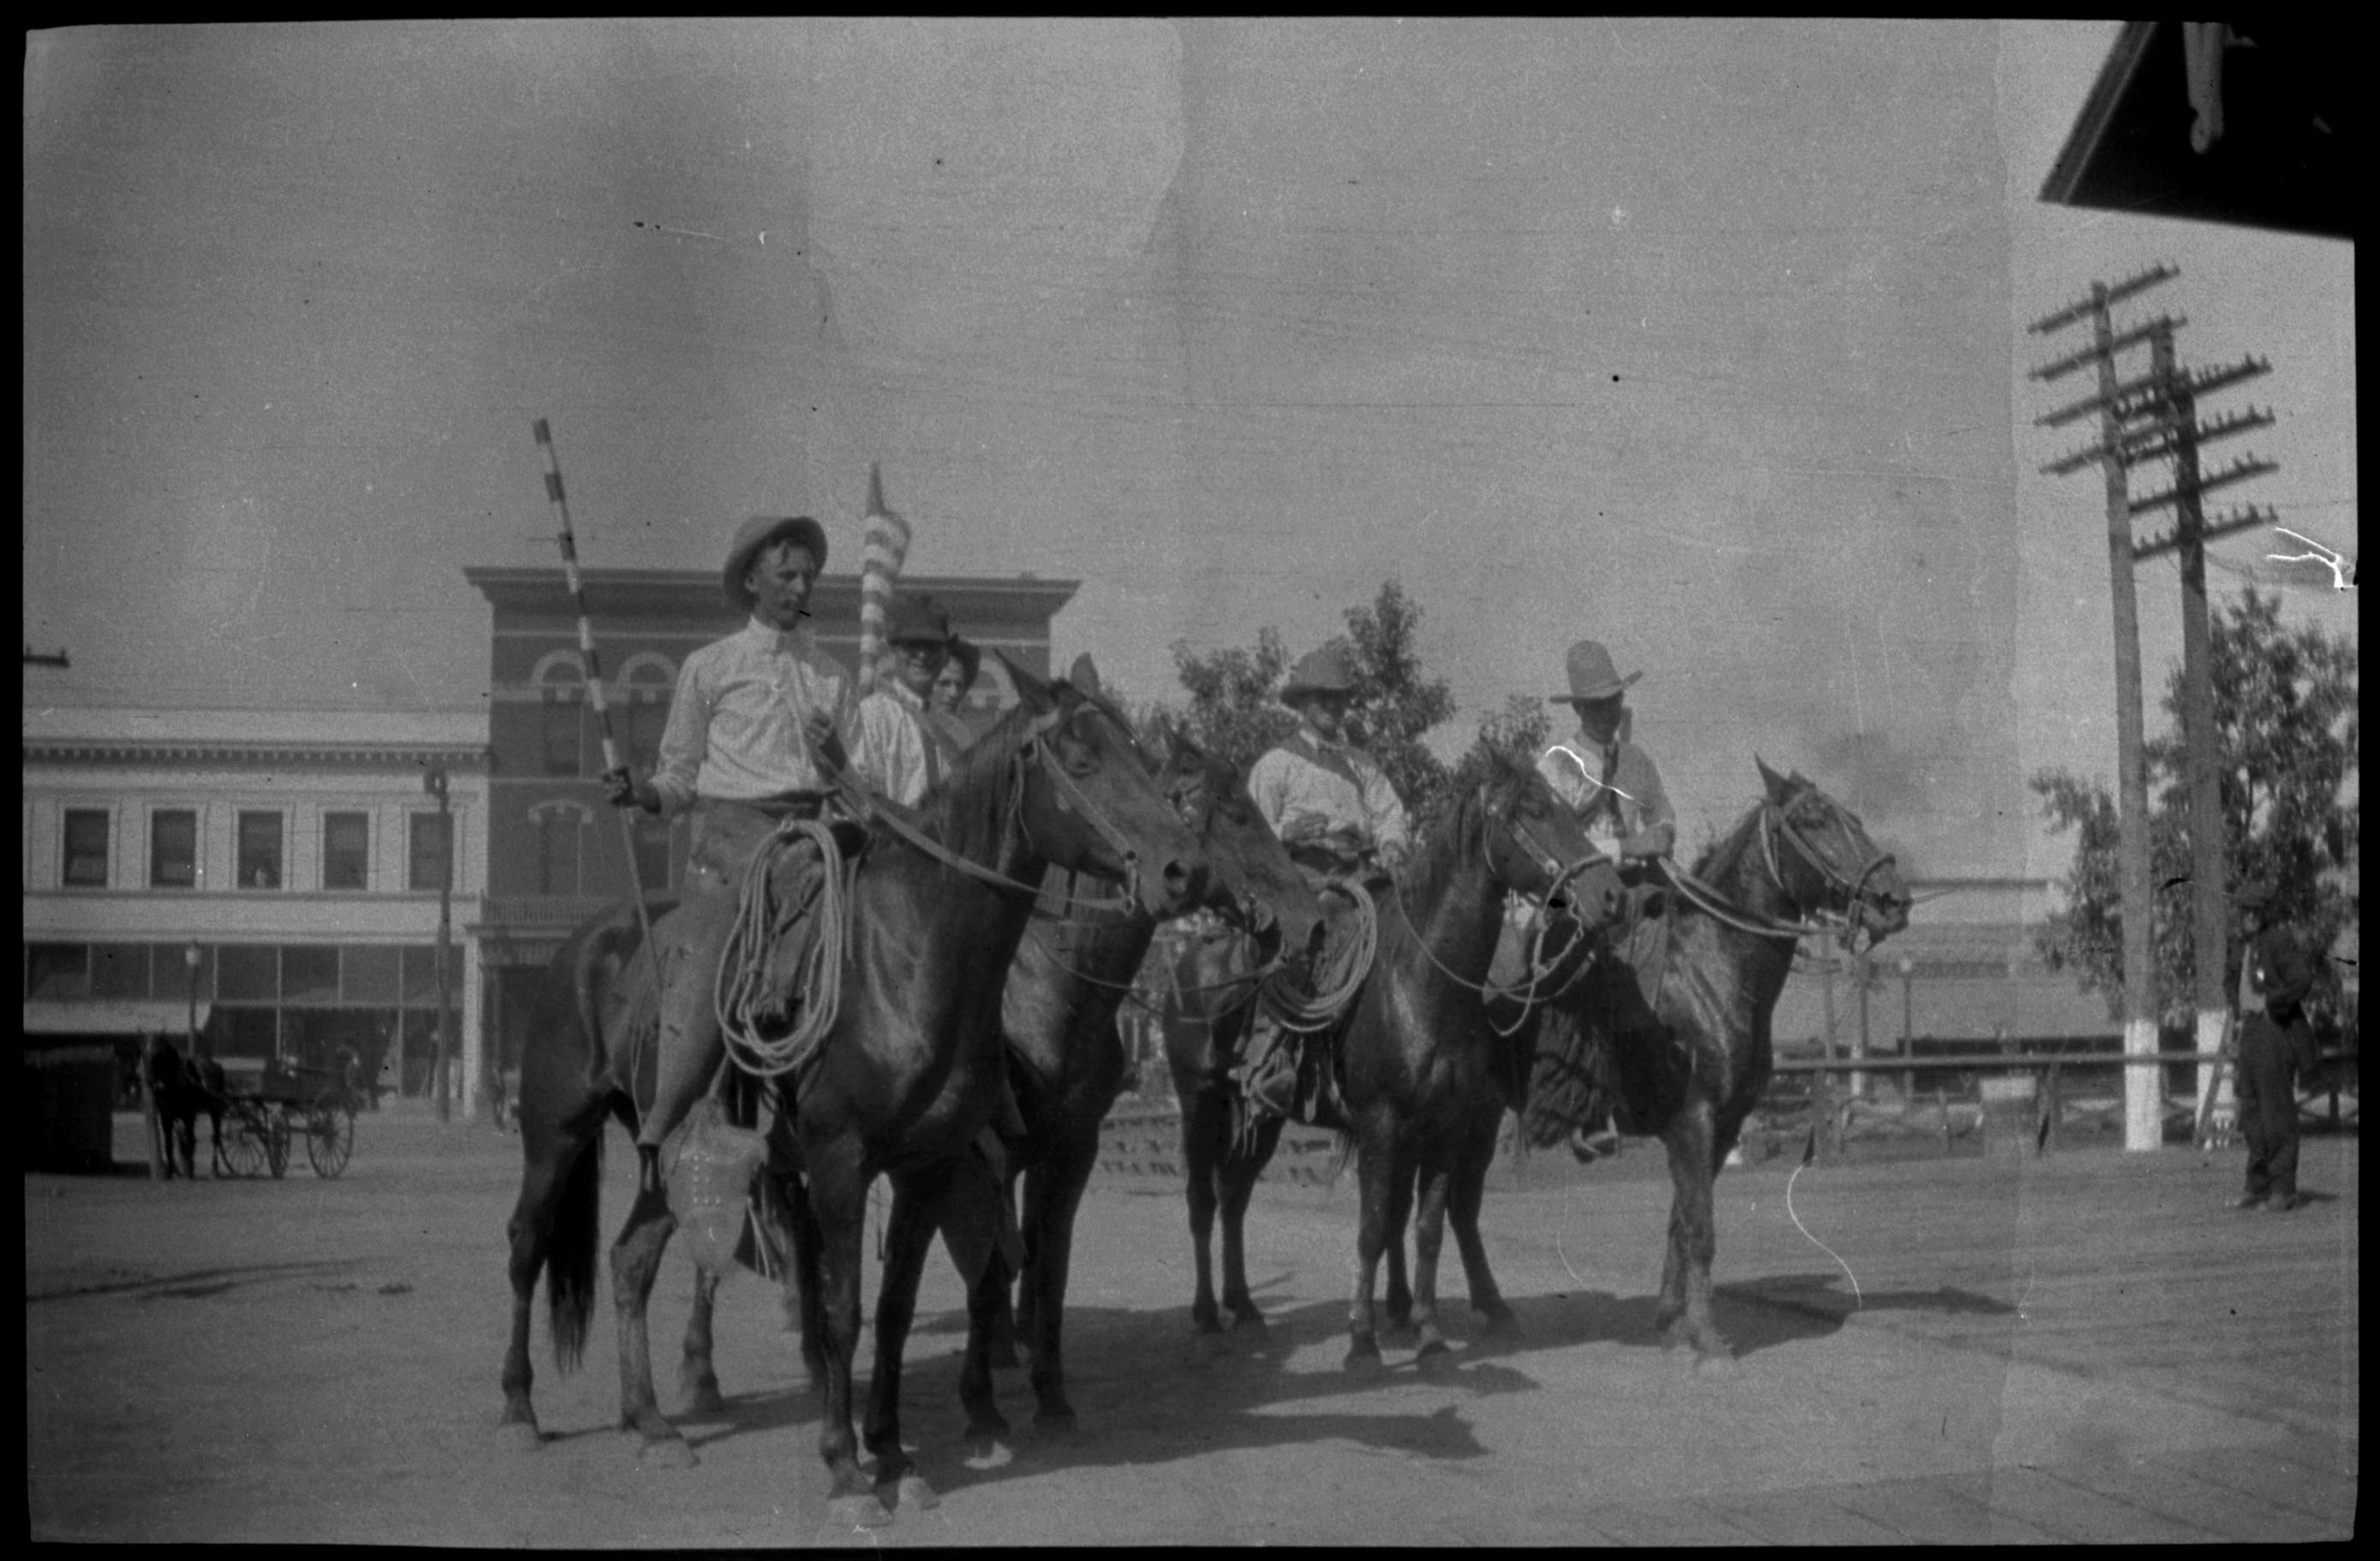 Four people on horses | George W. Tabor Photographs